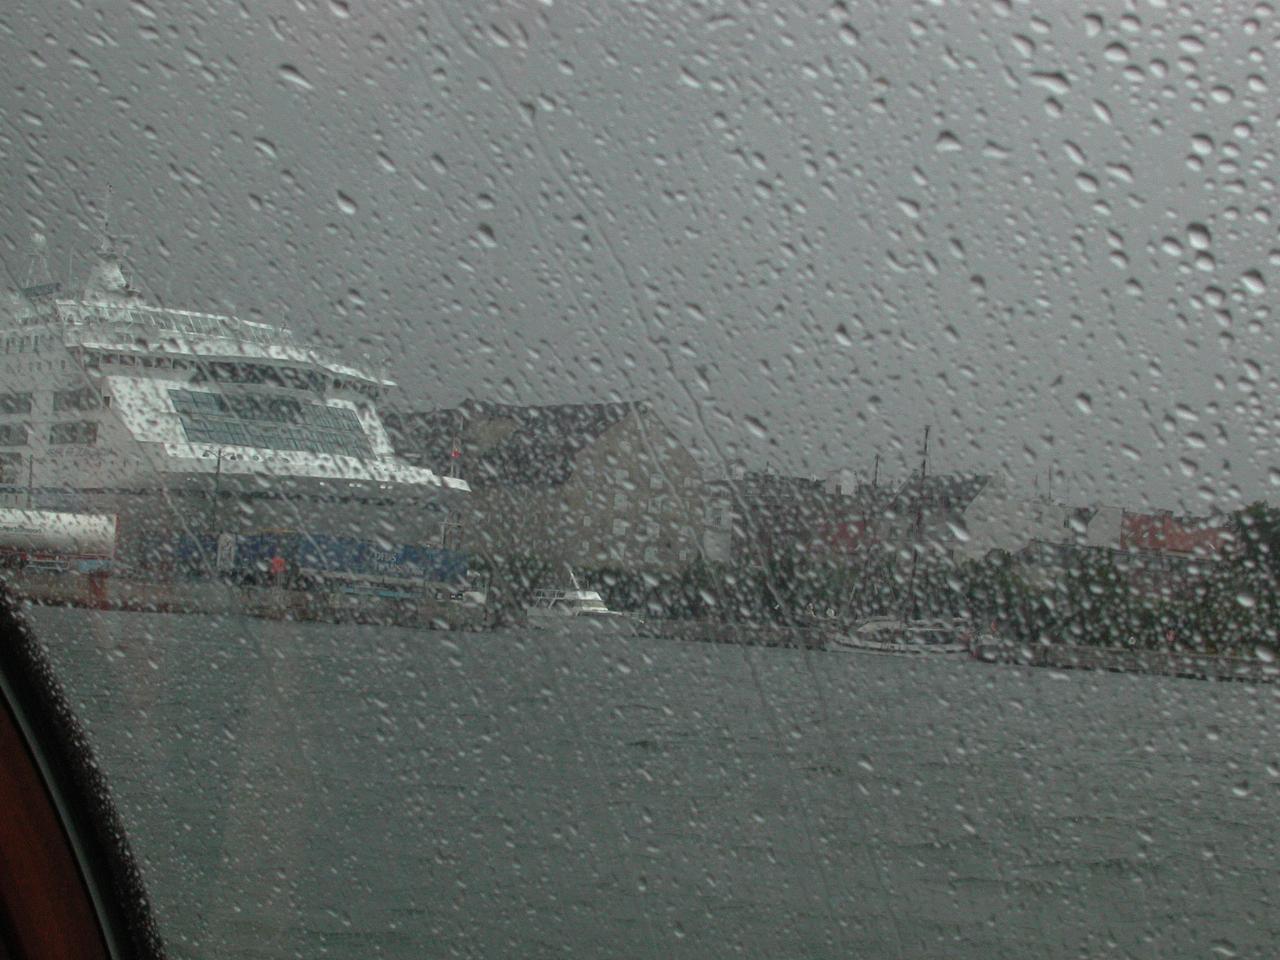 KPLU Viking Jazz: Admiral Hotel, ferry, as seen from canal tour boat